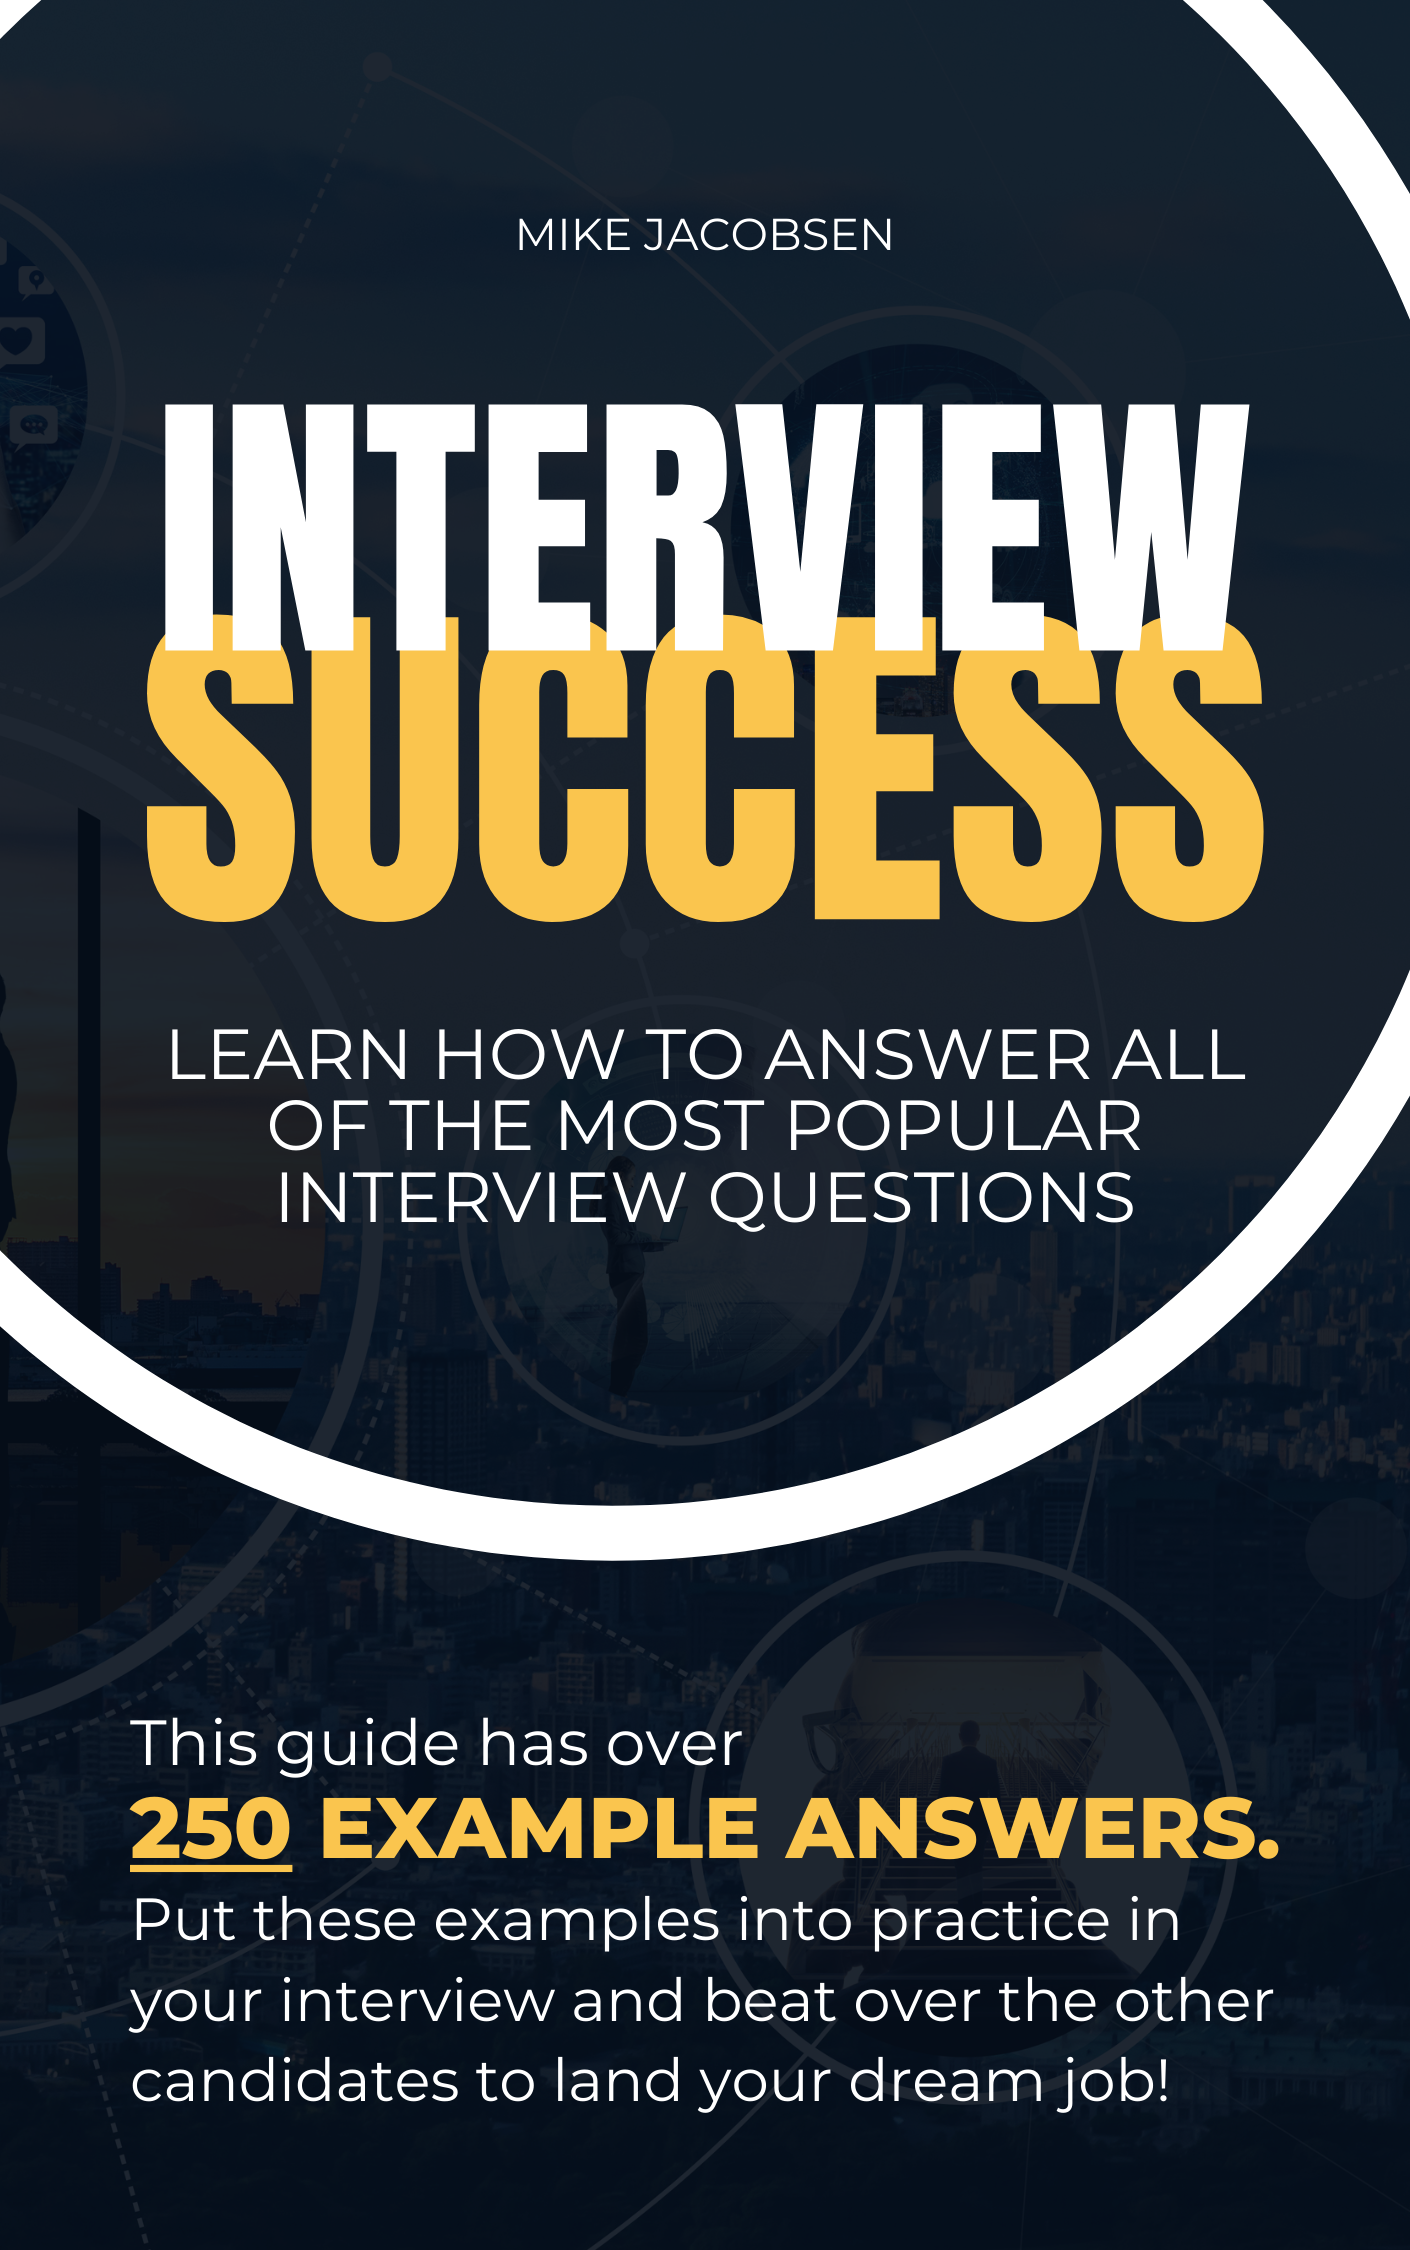 How to Answer the Most Popular Interview Questions